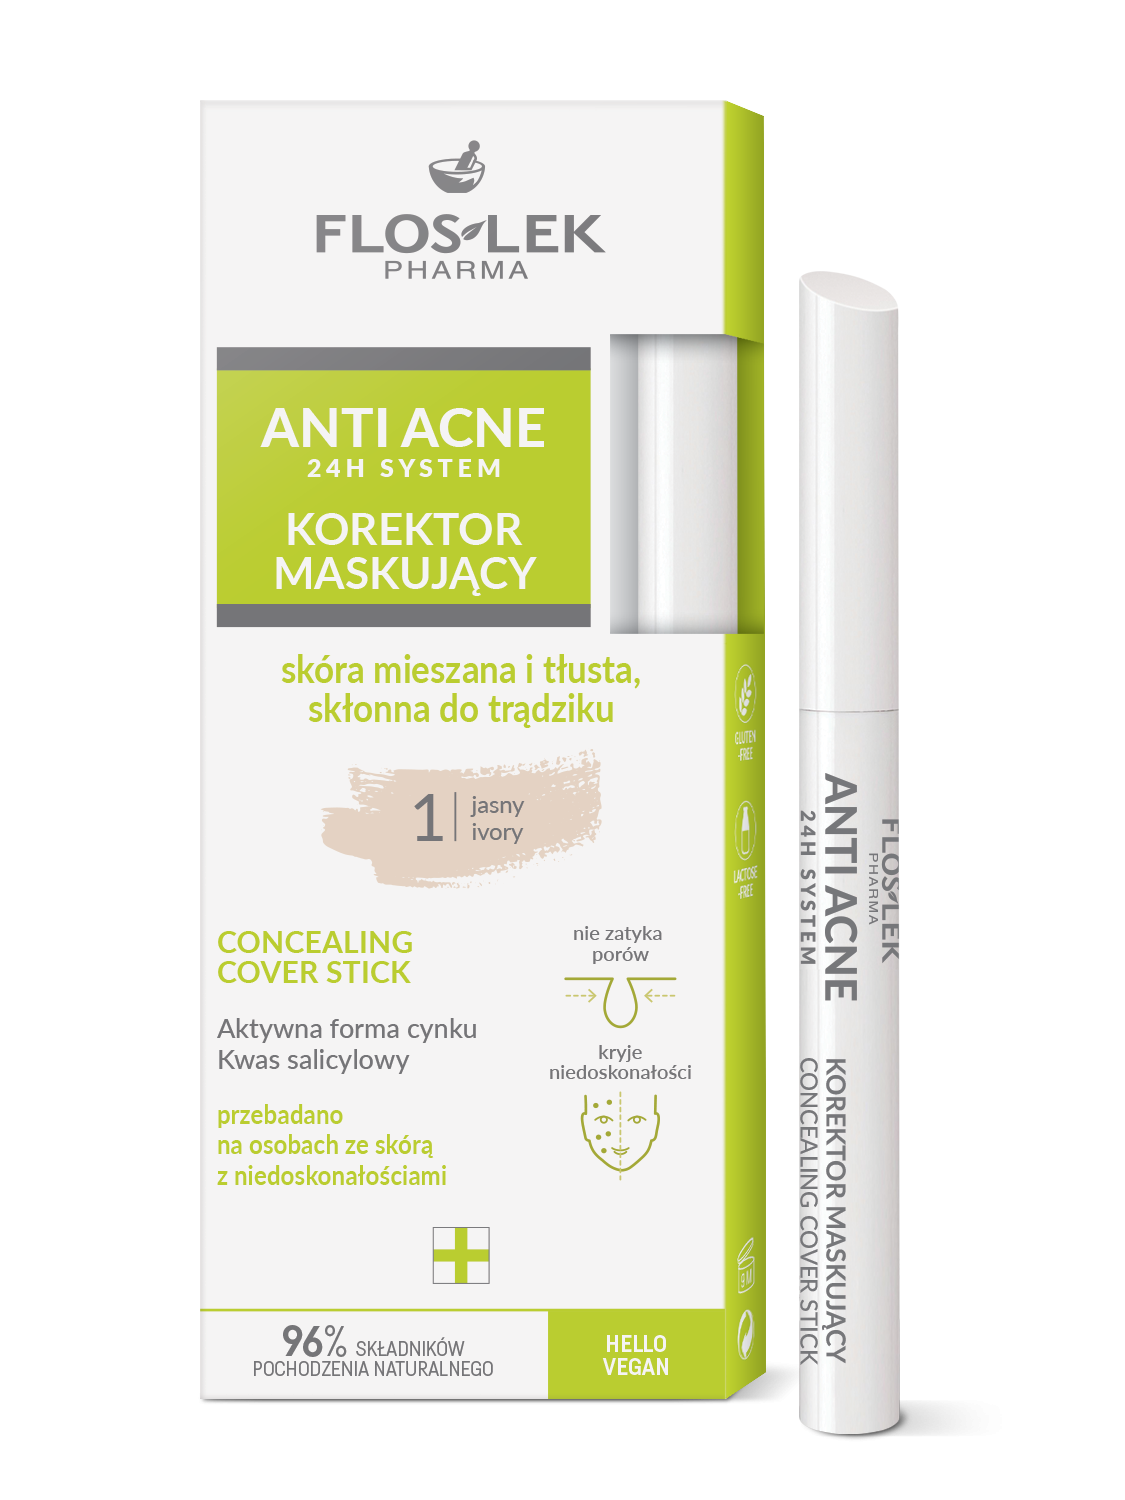 ANTI ACNE 24H System Concealing cover stick - ivory 1 - Floslek